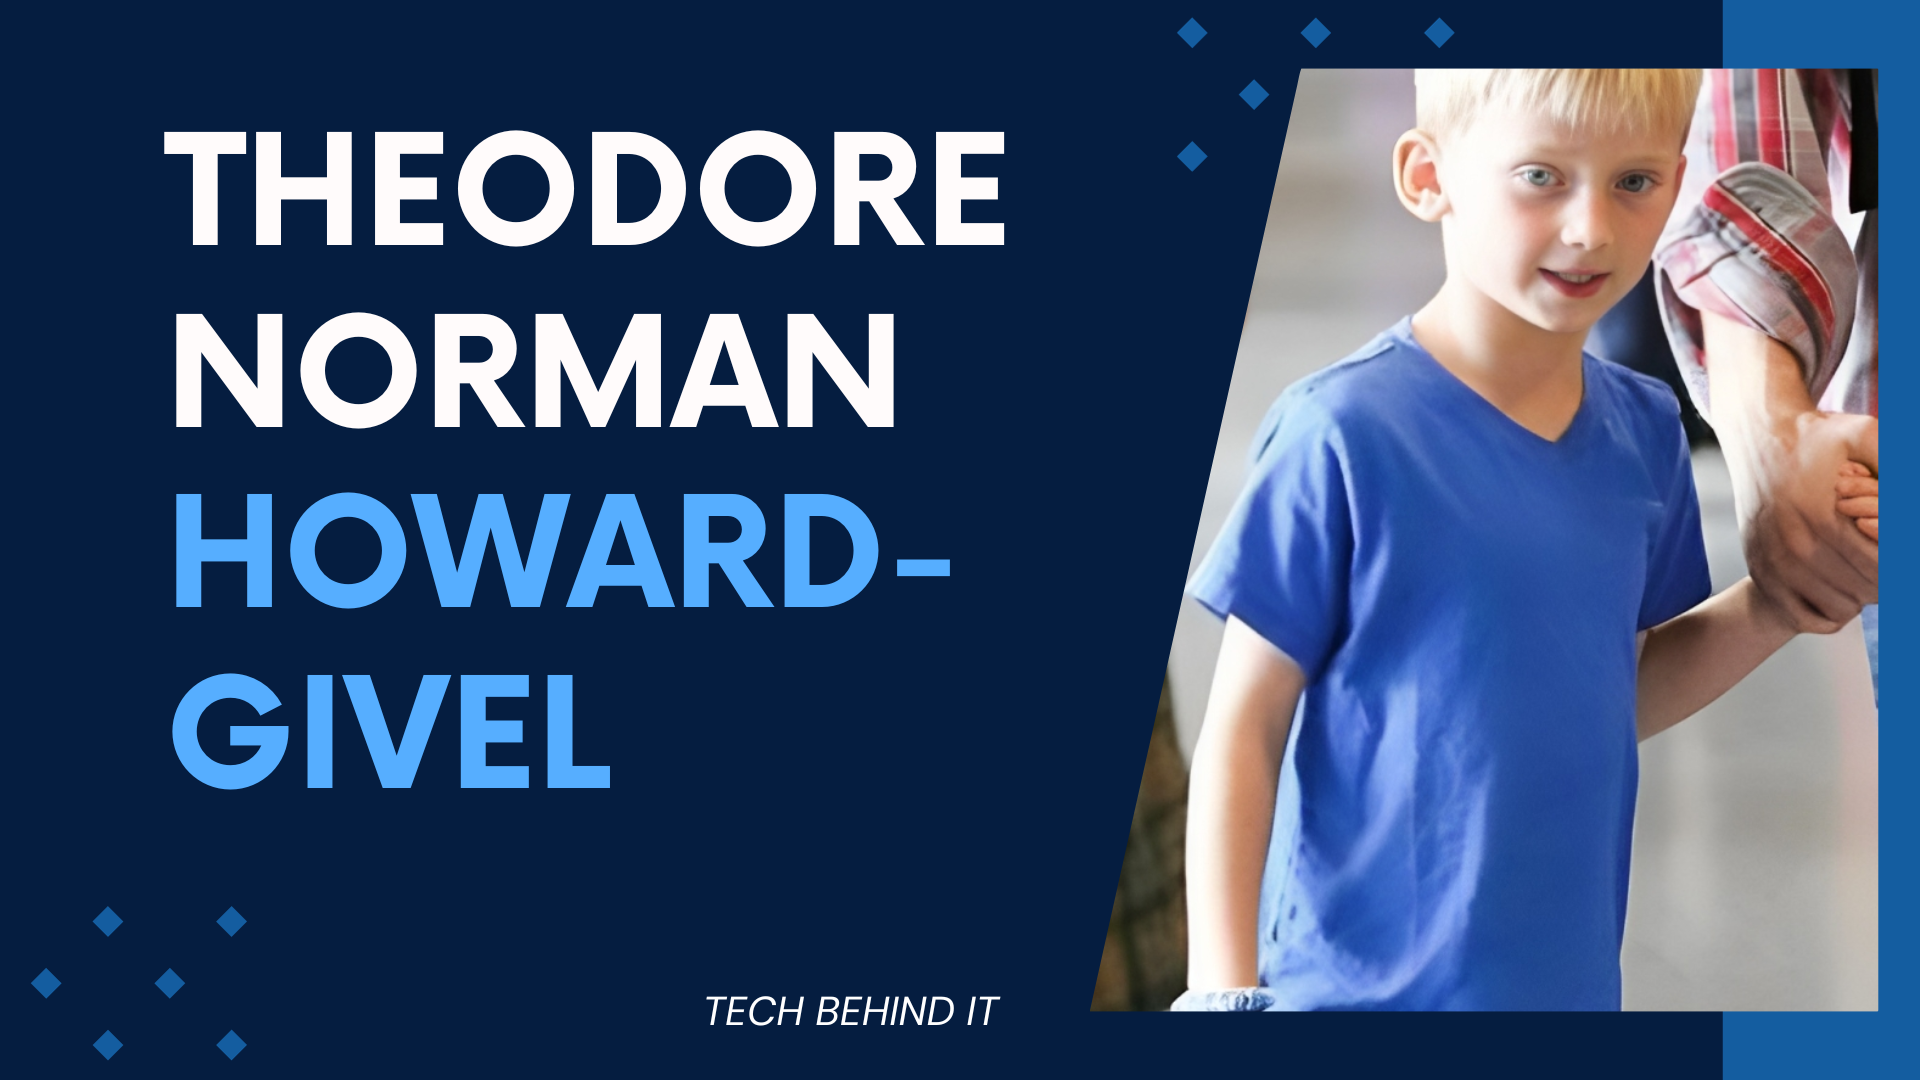 Theodore Norman Howard-Givel: Bio, Family, Net Worth, and More